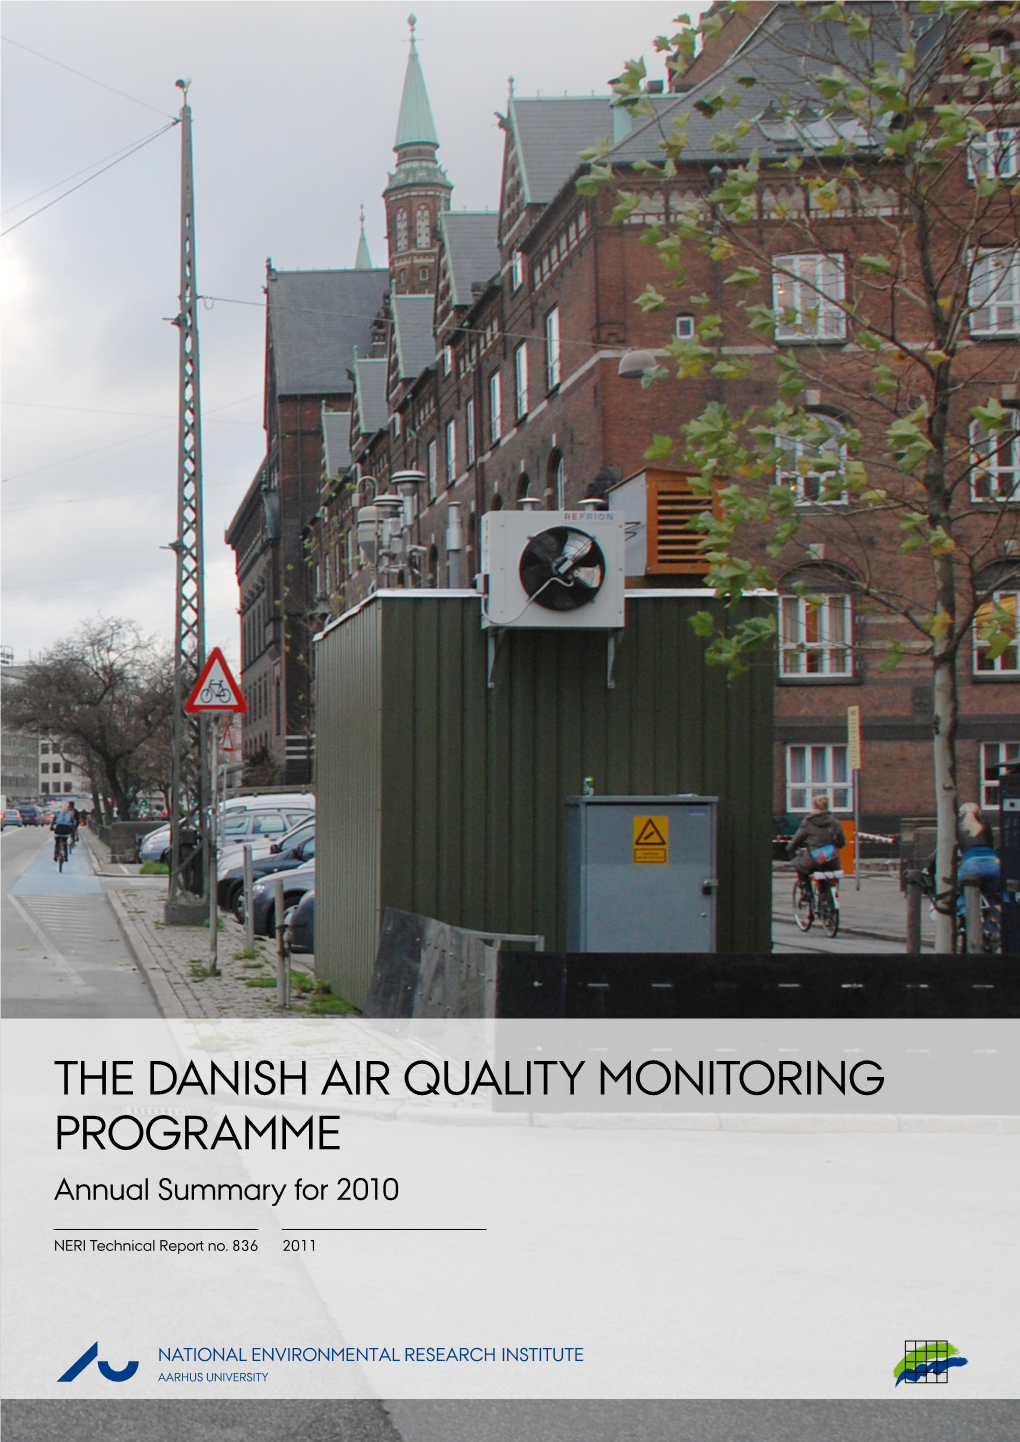 THE DANISH AIR QUALITY MONITORING PROGRAMME Annual Summary for 2010